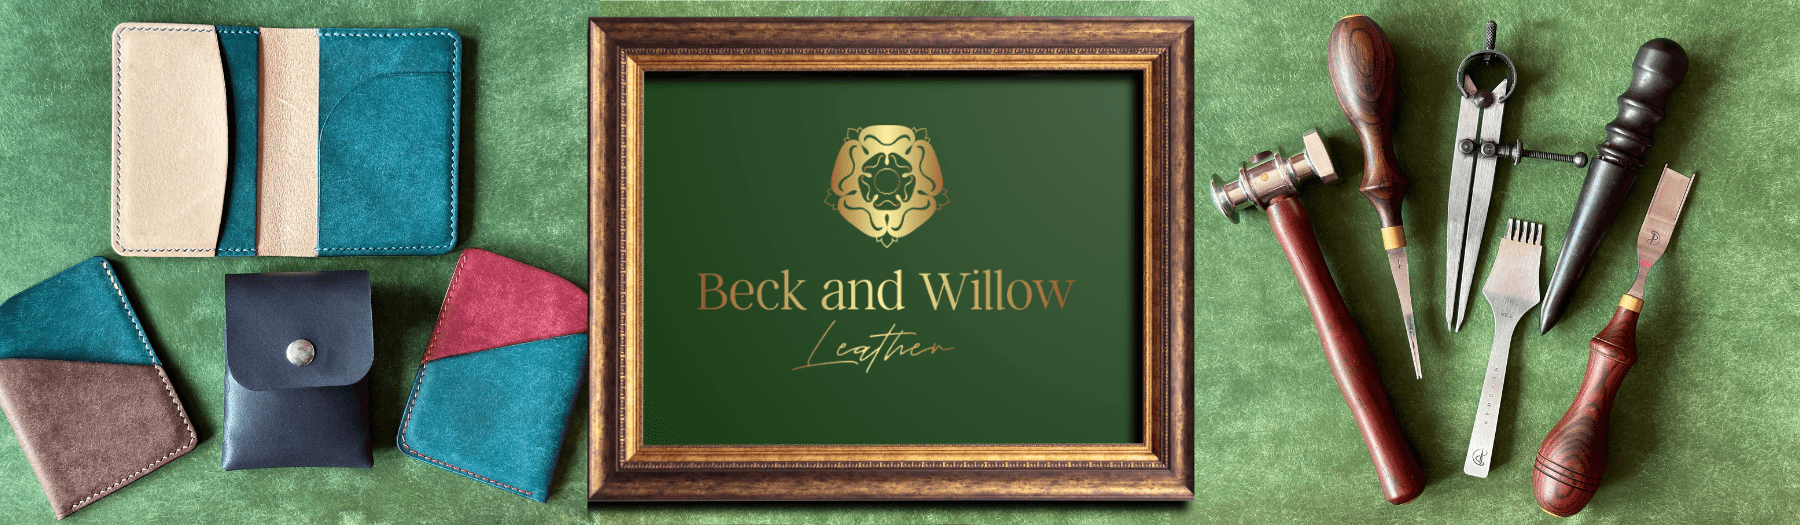 Beck and Willow Leather